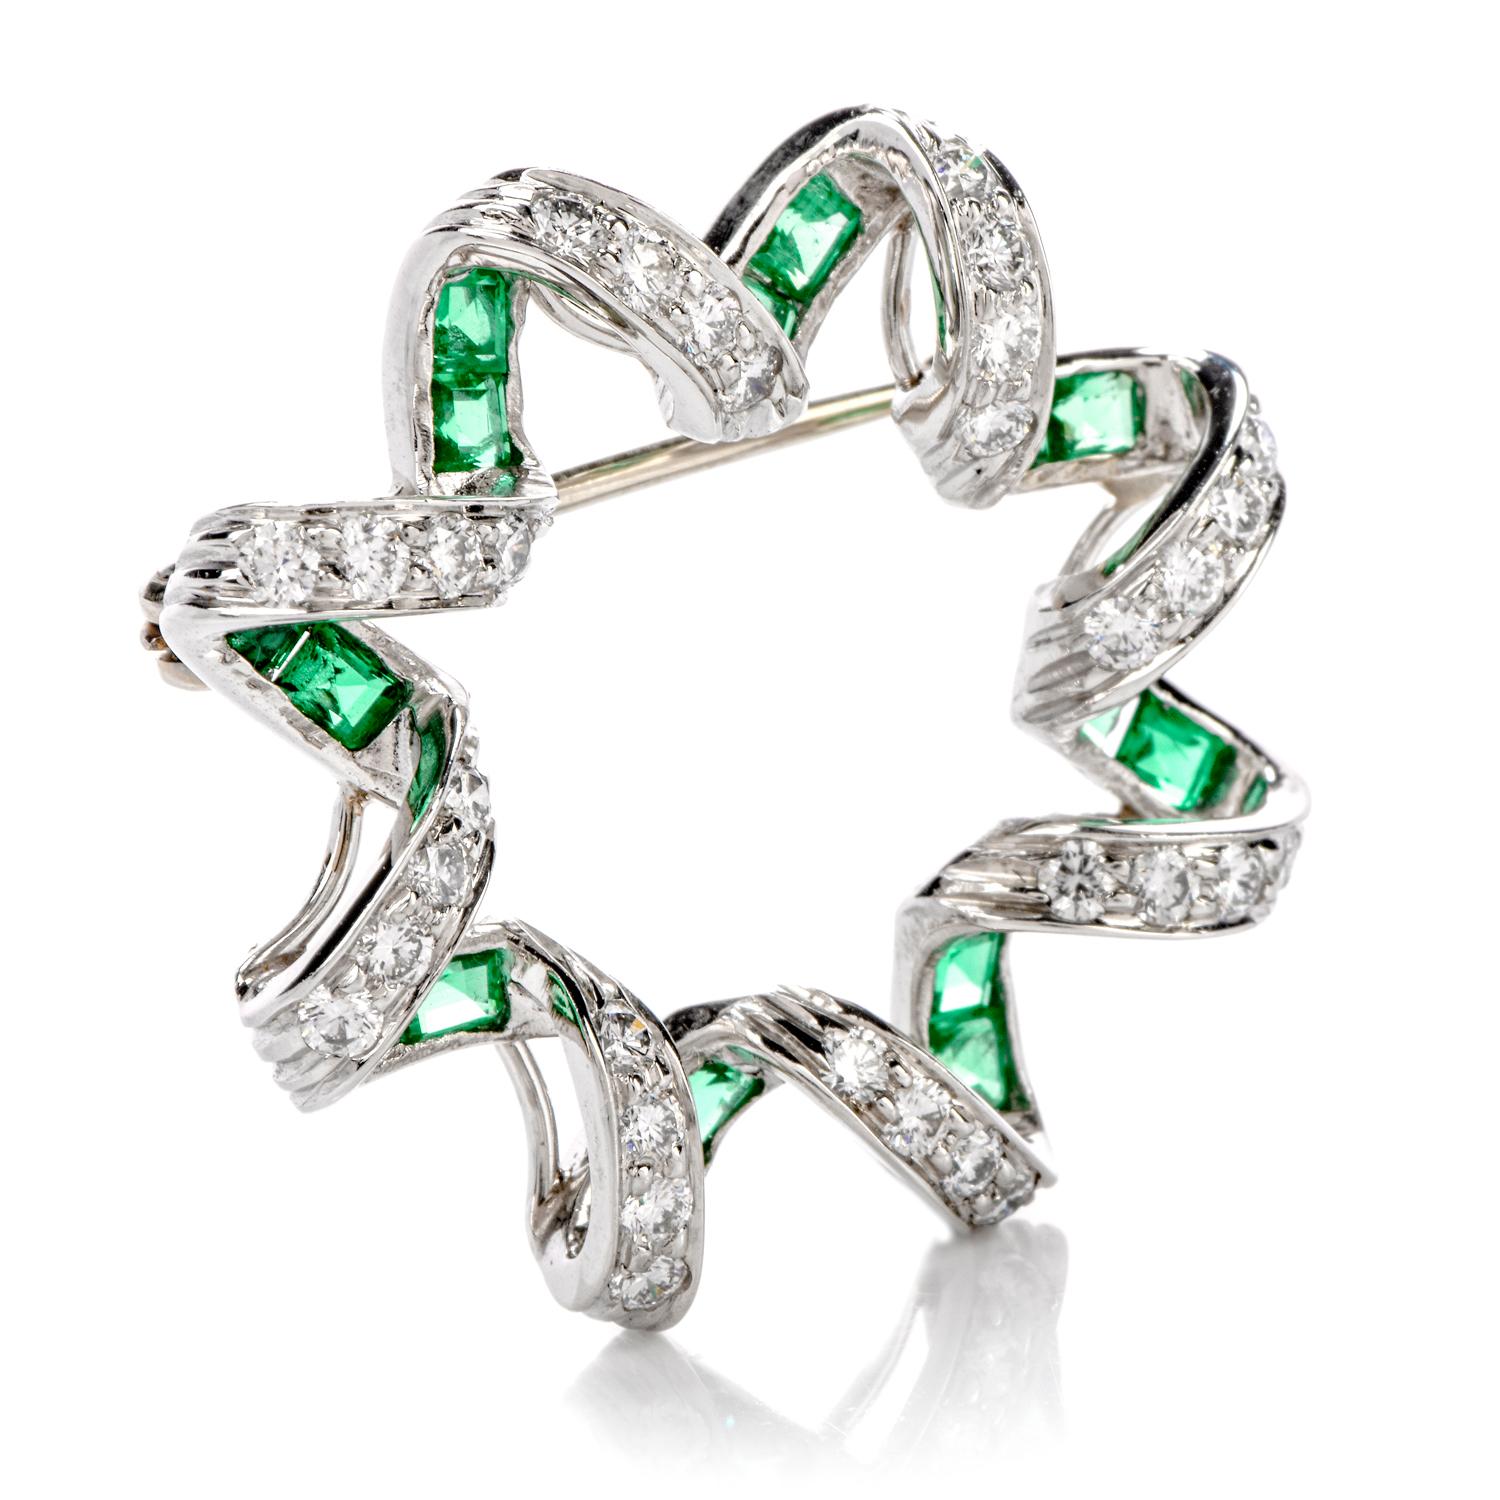 This rolling and twisted brooch was inspired in a Star

motif and crafted in luxurious Platinum.

With diamonds flowing over the top and emeralds shadowing below, the billowing

design boasts with contrasting colors.

32 Diamonds cumulatively weigh